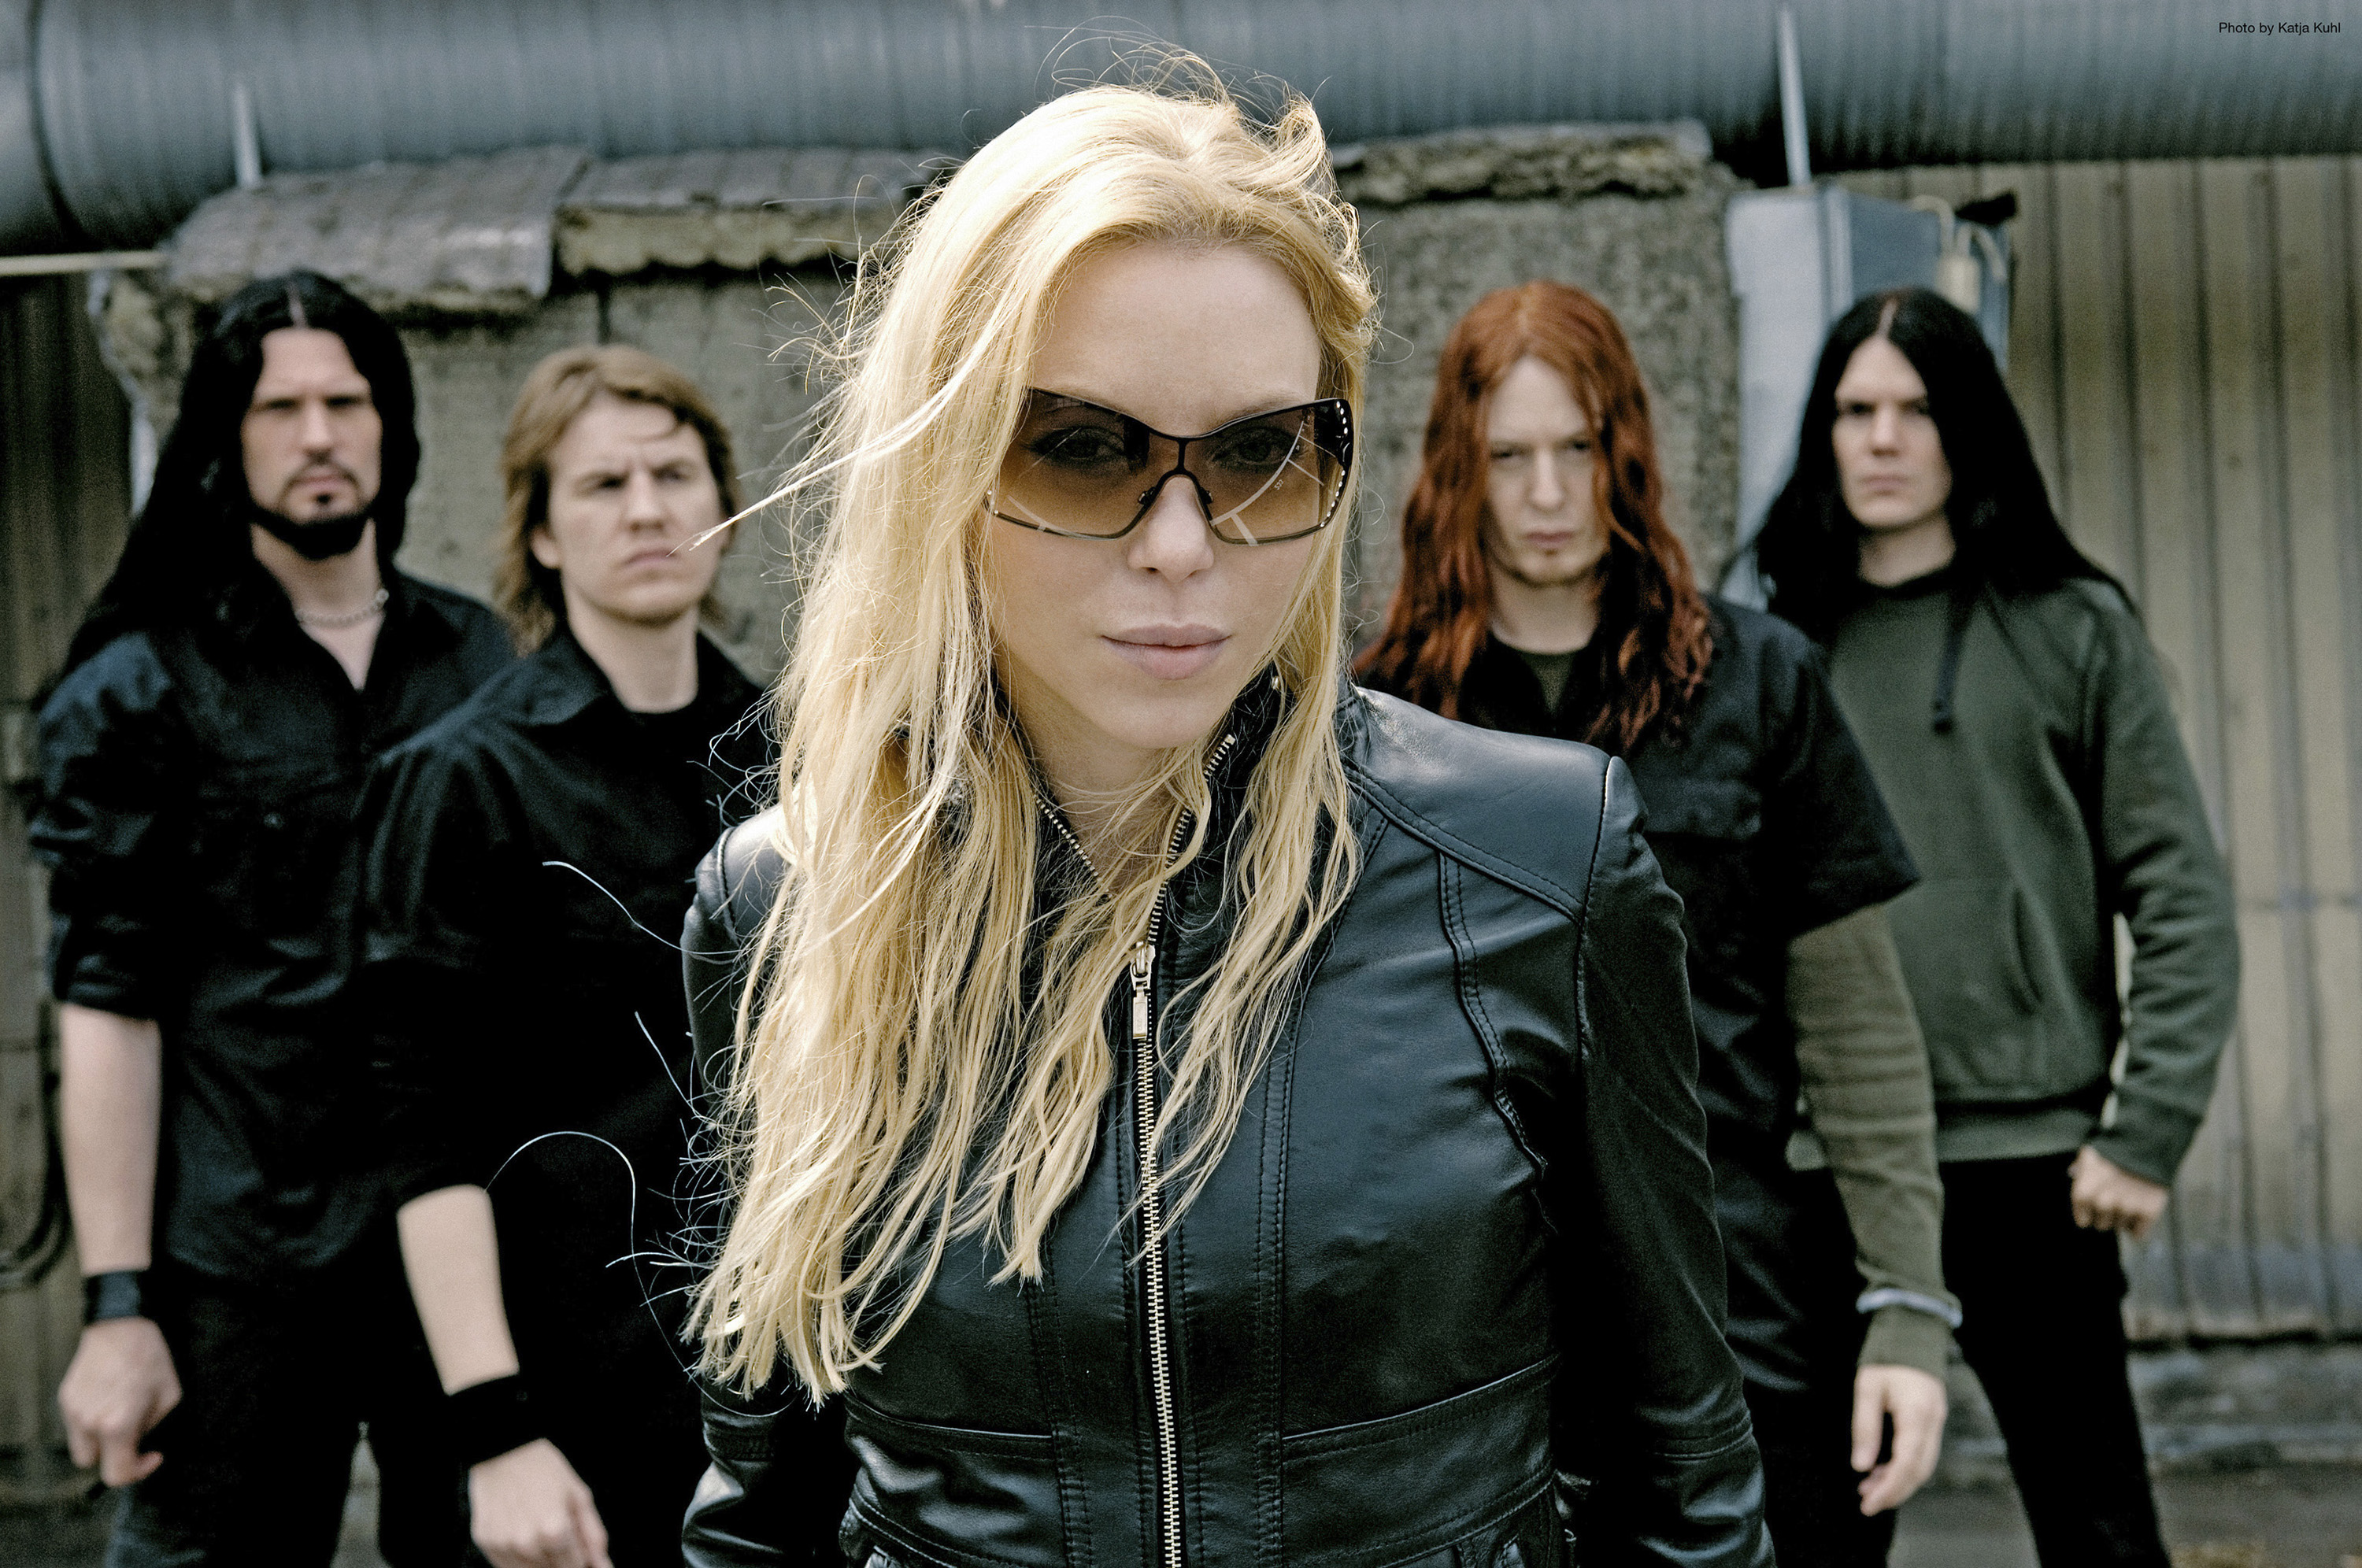 arch, Enemy, Groups, Bands, Heavy, Metal, Death, Hard, Rock, Music, Entertainment, Angela, Gossow, Blondes, People Wallpaper